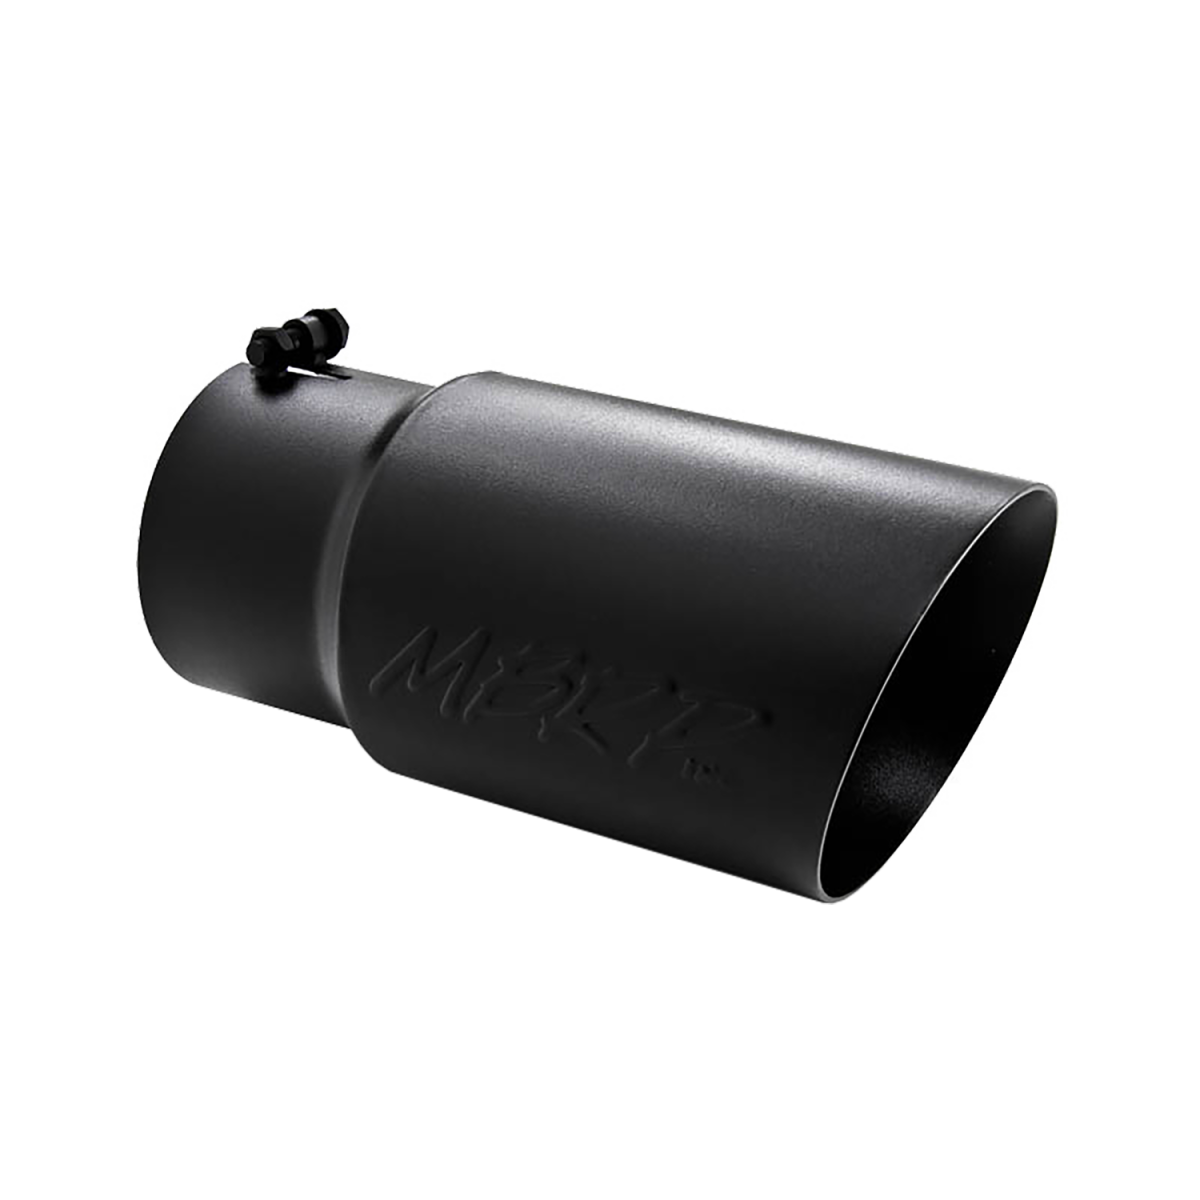 MBRP - MBRP Exhaust Tip 6 Inch O.D. Dual Wall Angled 5 Inch Inlet 12 Inch Length-Black Finish T5074BLK